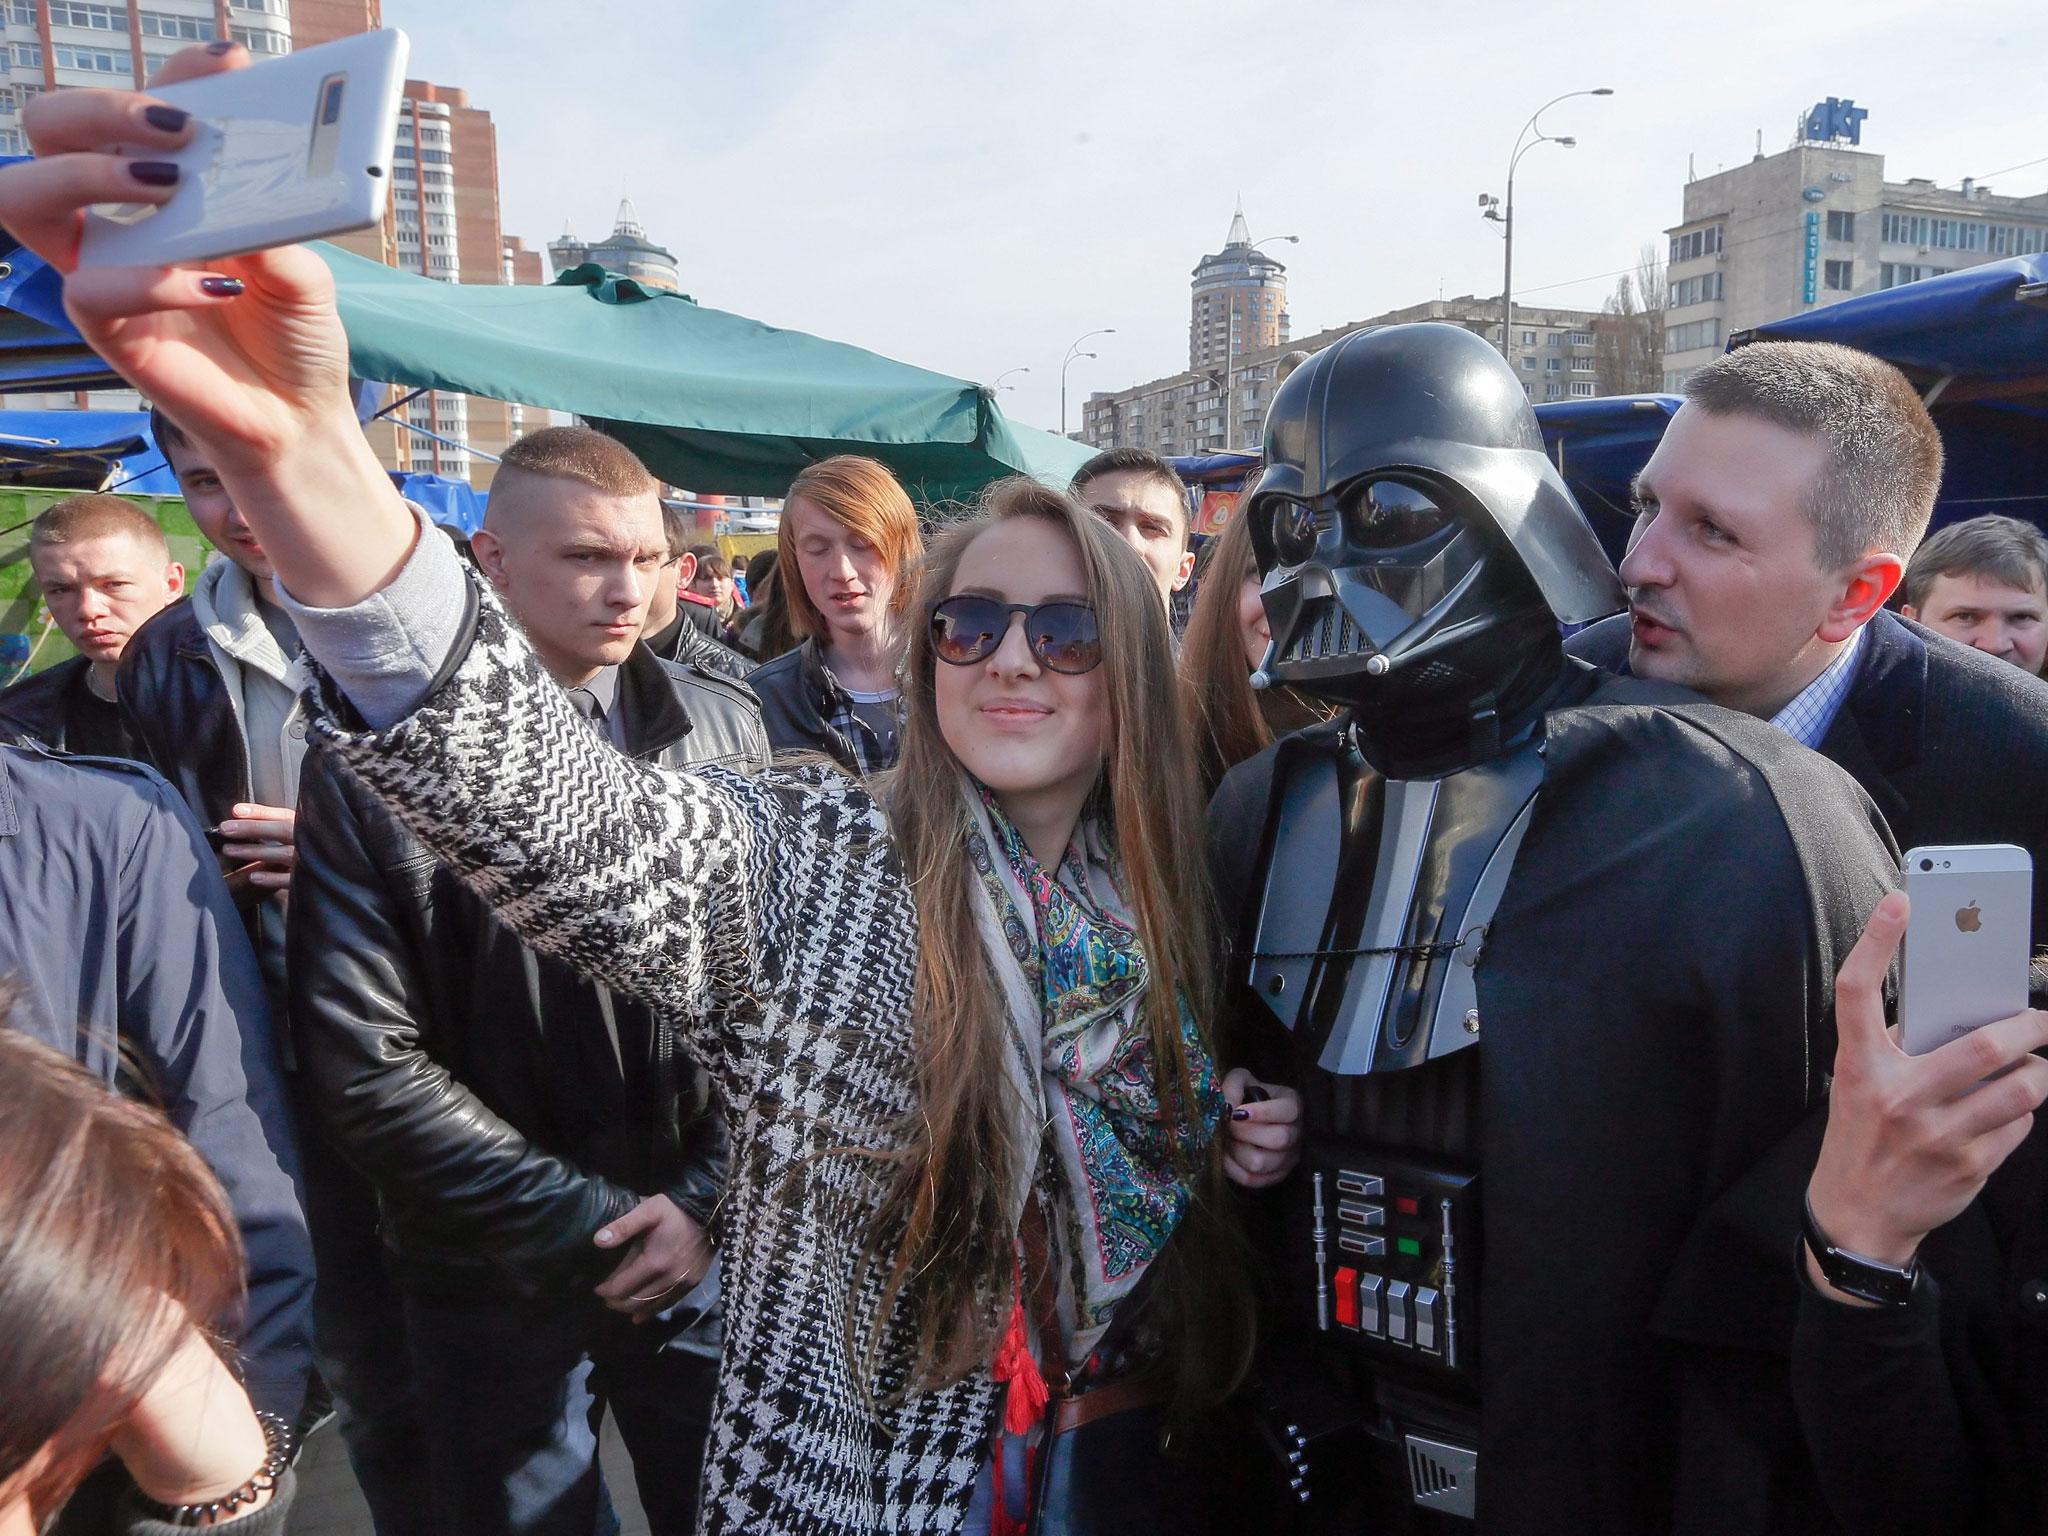 Ukrainians take 'selfie' souvenir snapshots with a 'Darth Vader' impersonator in front of the Central Elections Committee in Kiev